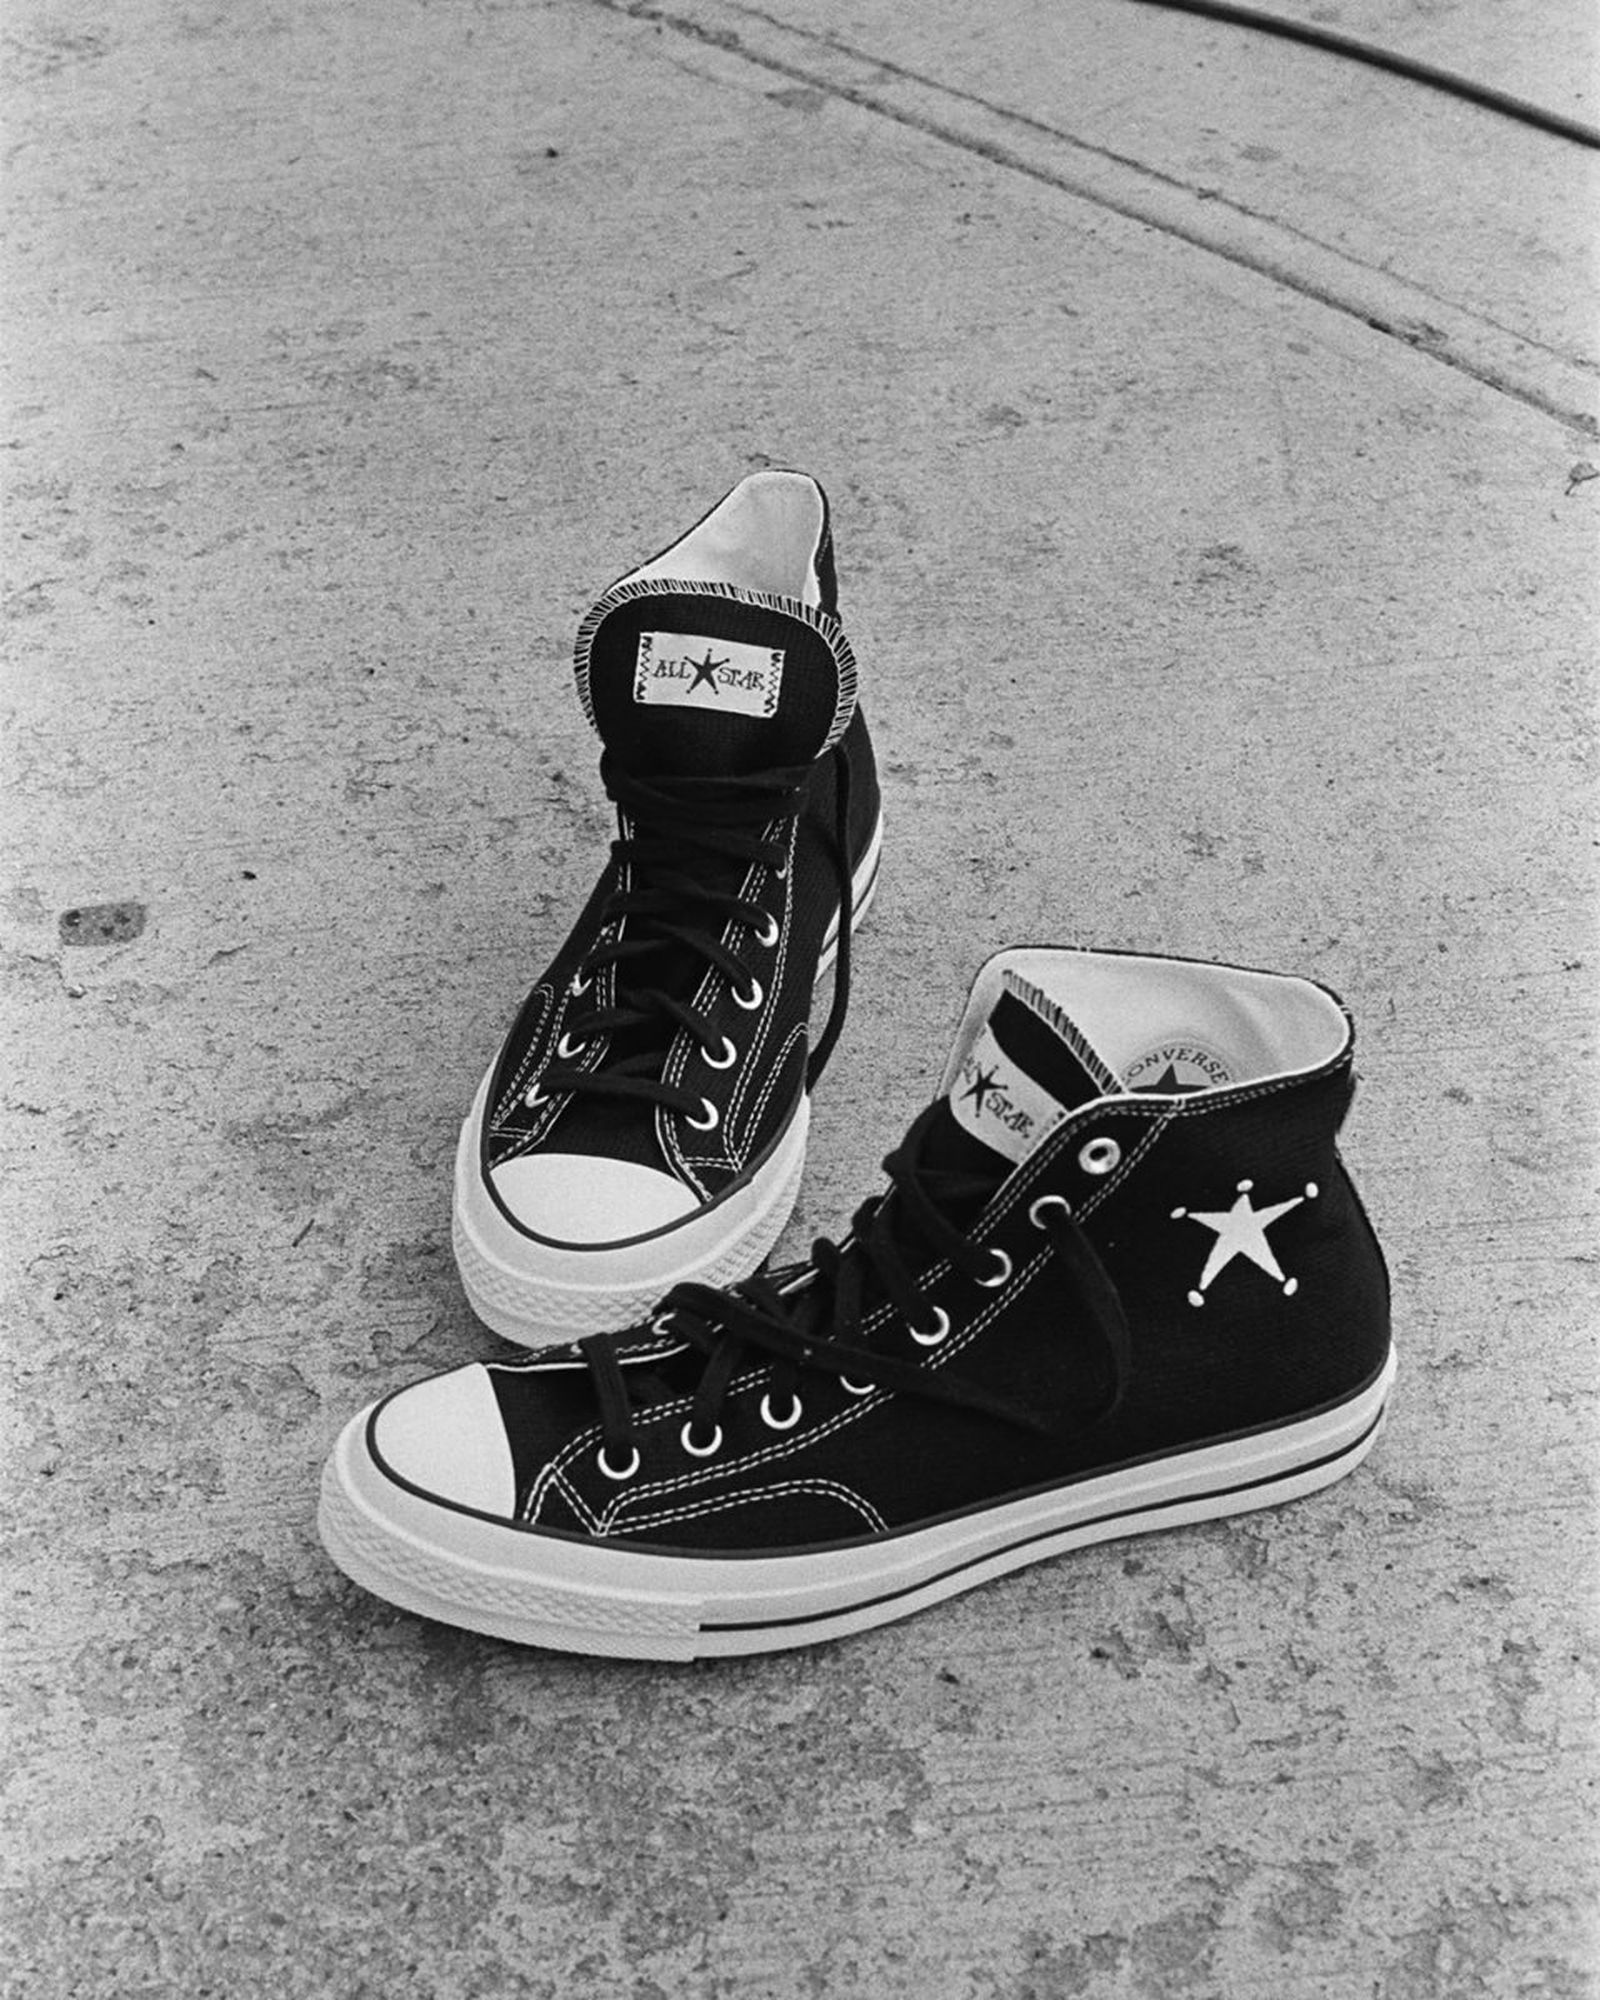 Stüssy & Converse Return With Pearly Chuck 70 Hi Sneakers